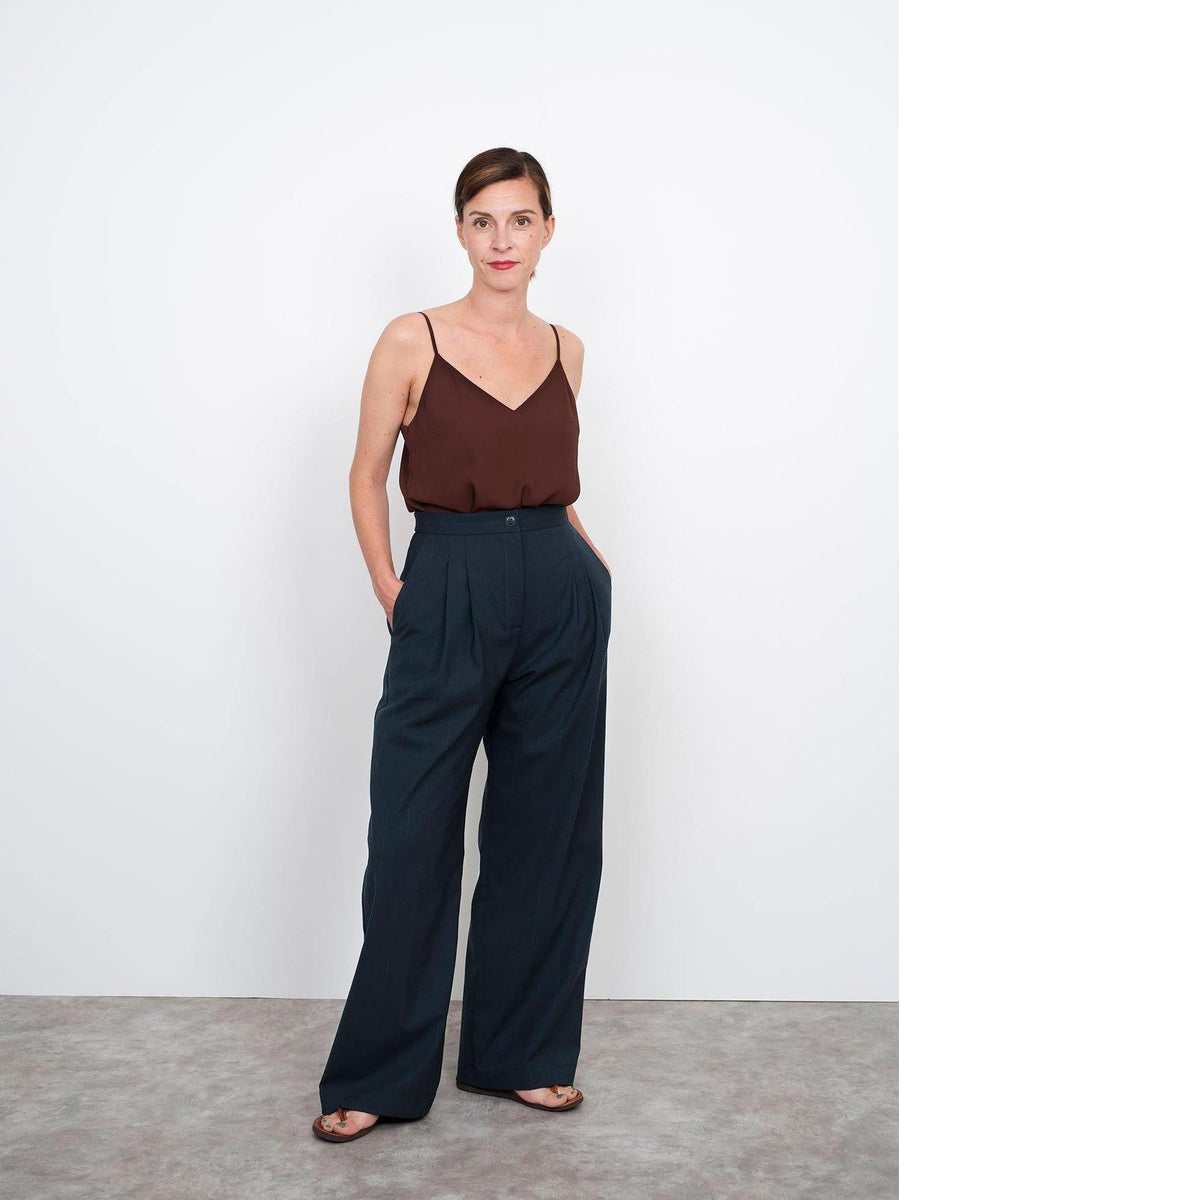 The City Trousers. Trouser sewing pattern. - The Avid Seamstress